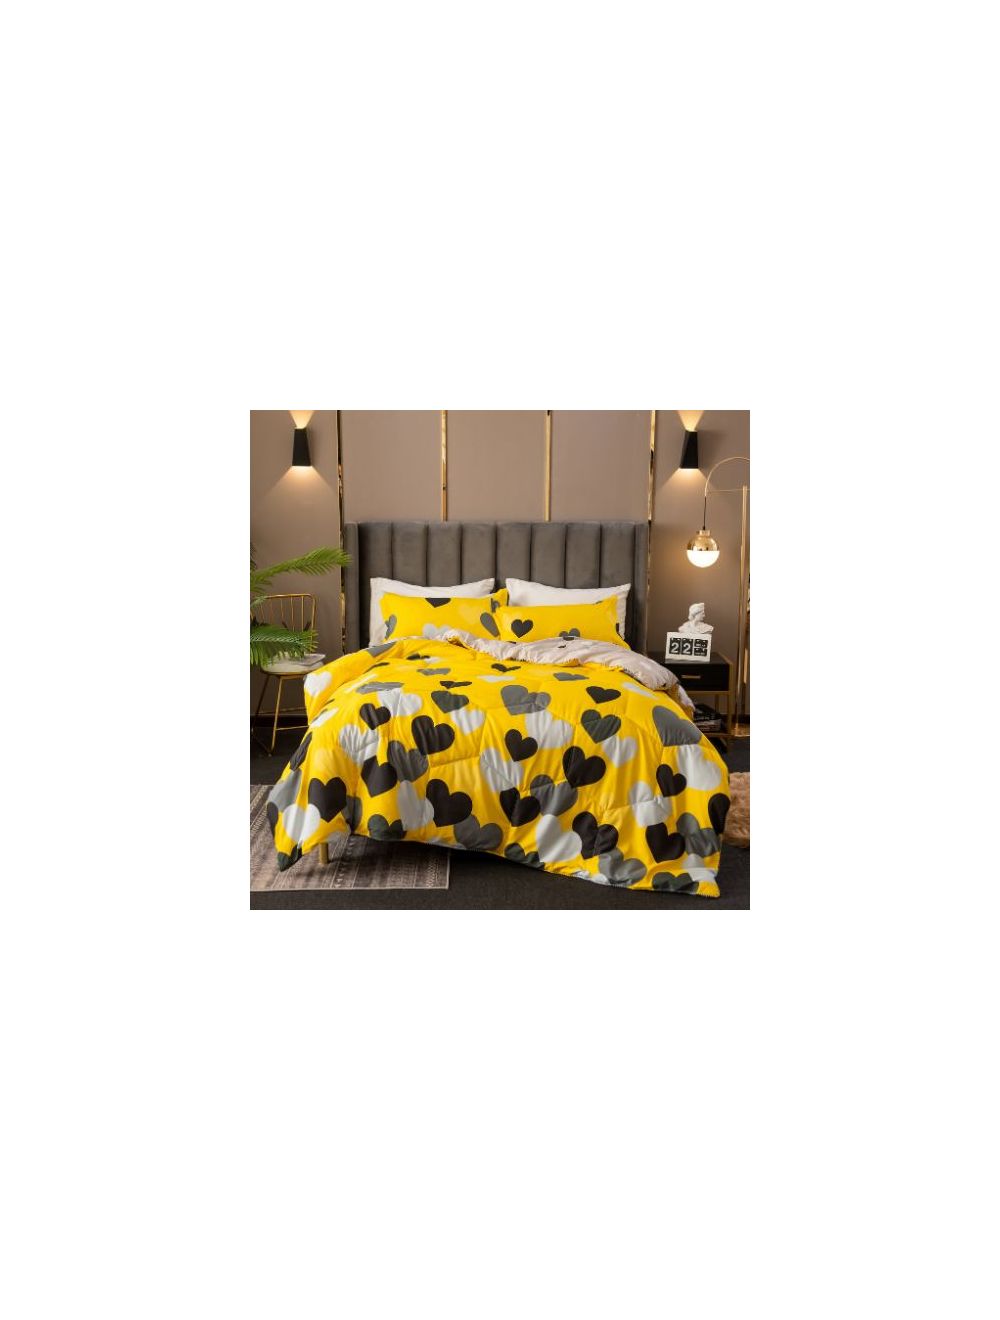 DEALS FOR LESS - Comforter Set Of 4 Pieces, Yellow Heart Design.-cft33-03